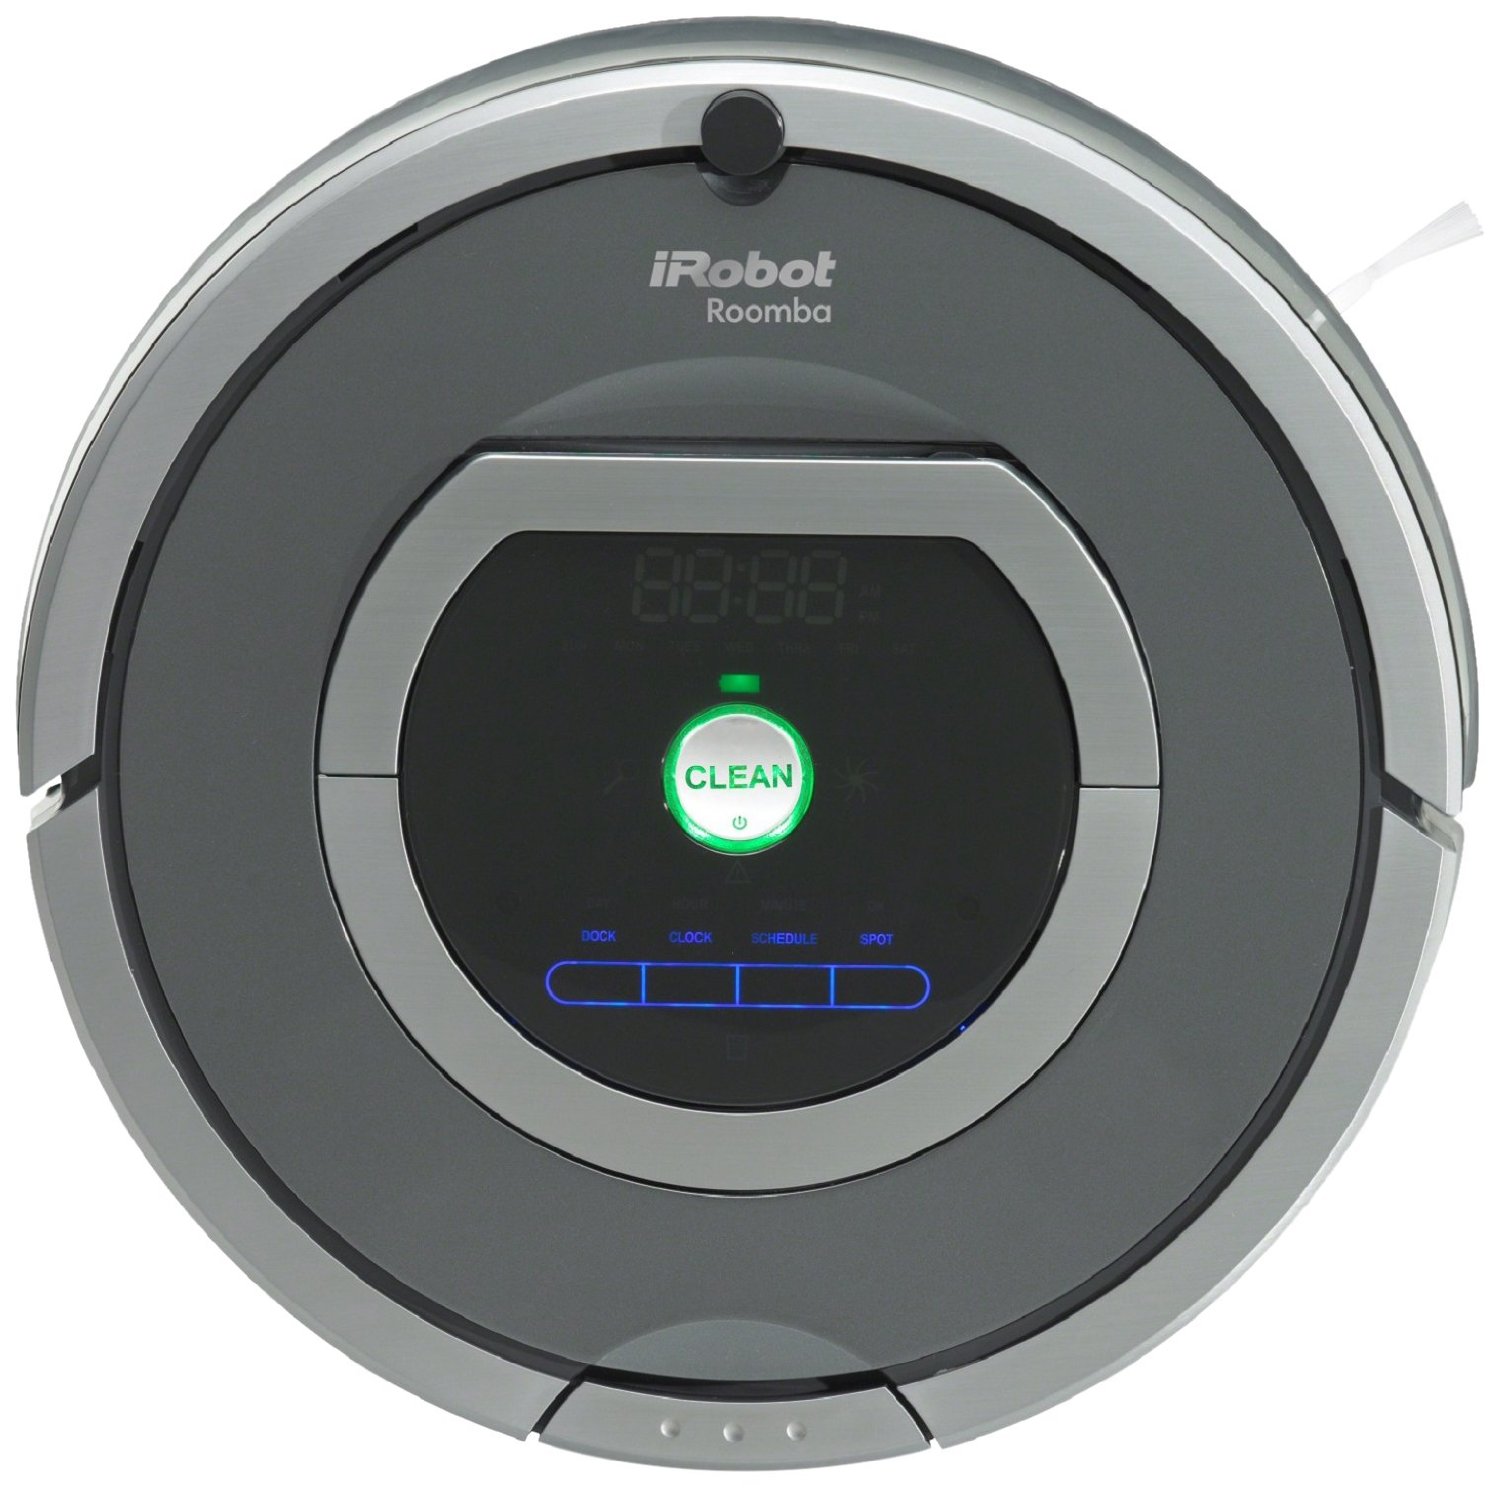 Cleaning robot Roomba by Irobot: